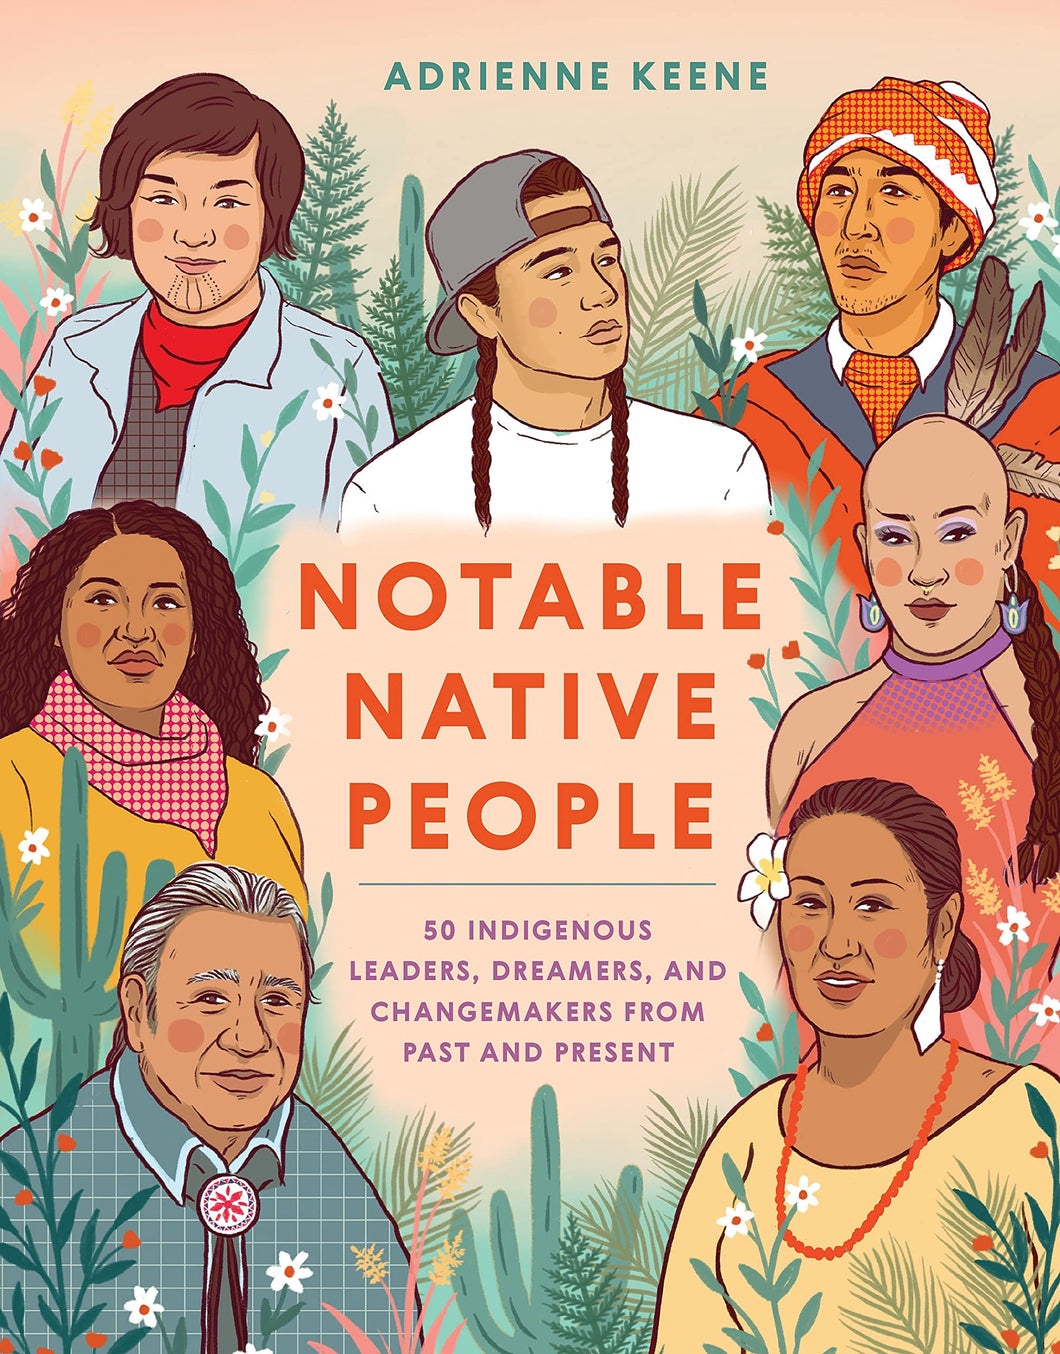 Notable Native People: 50 Indigenous Leaders, Dreamers, and Changemakers from Past and Present [Adrienne Keene]